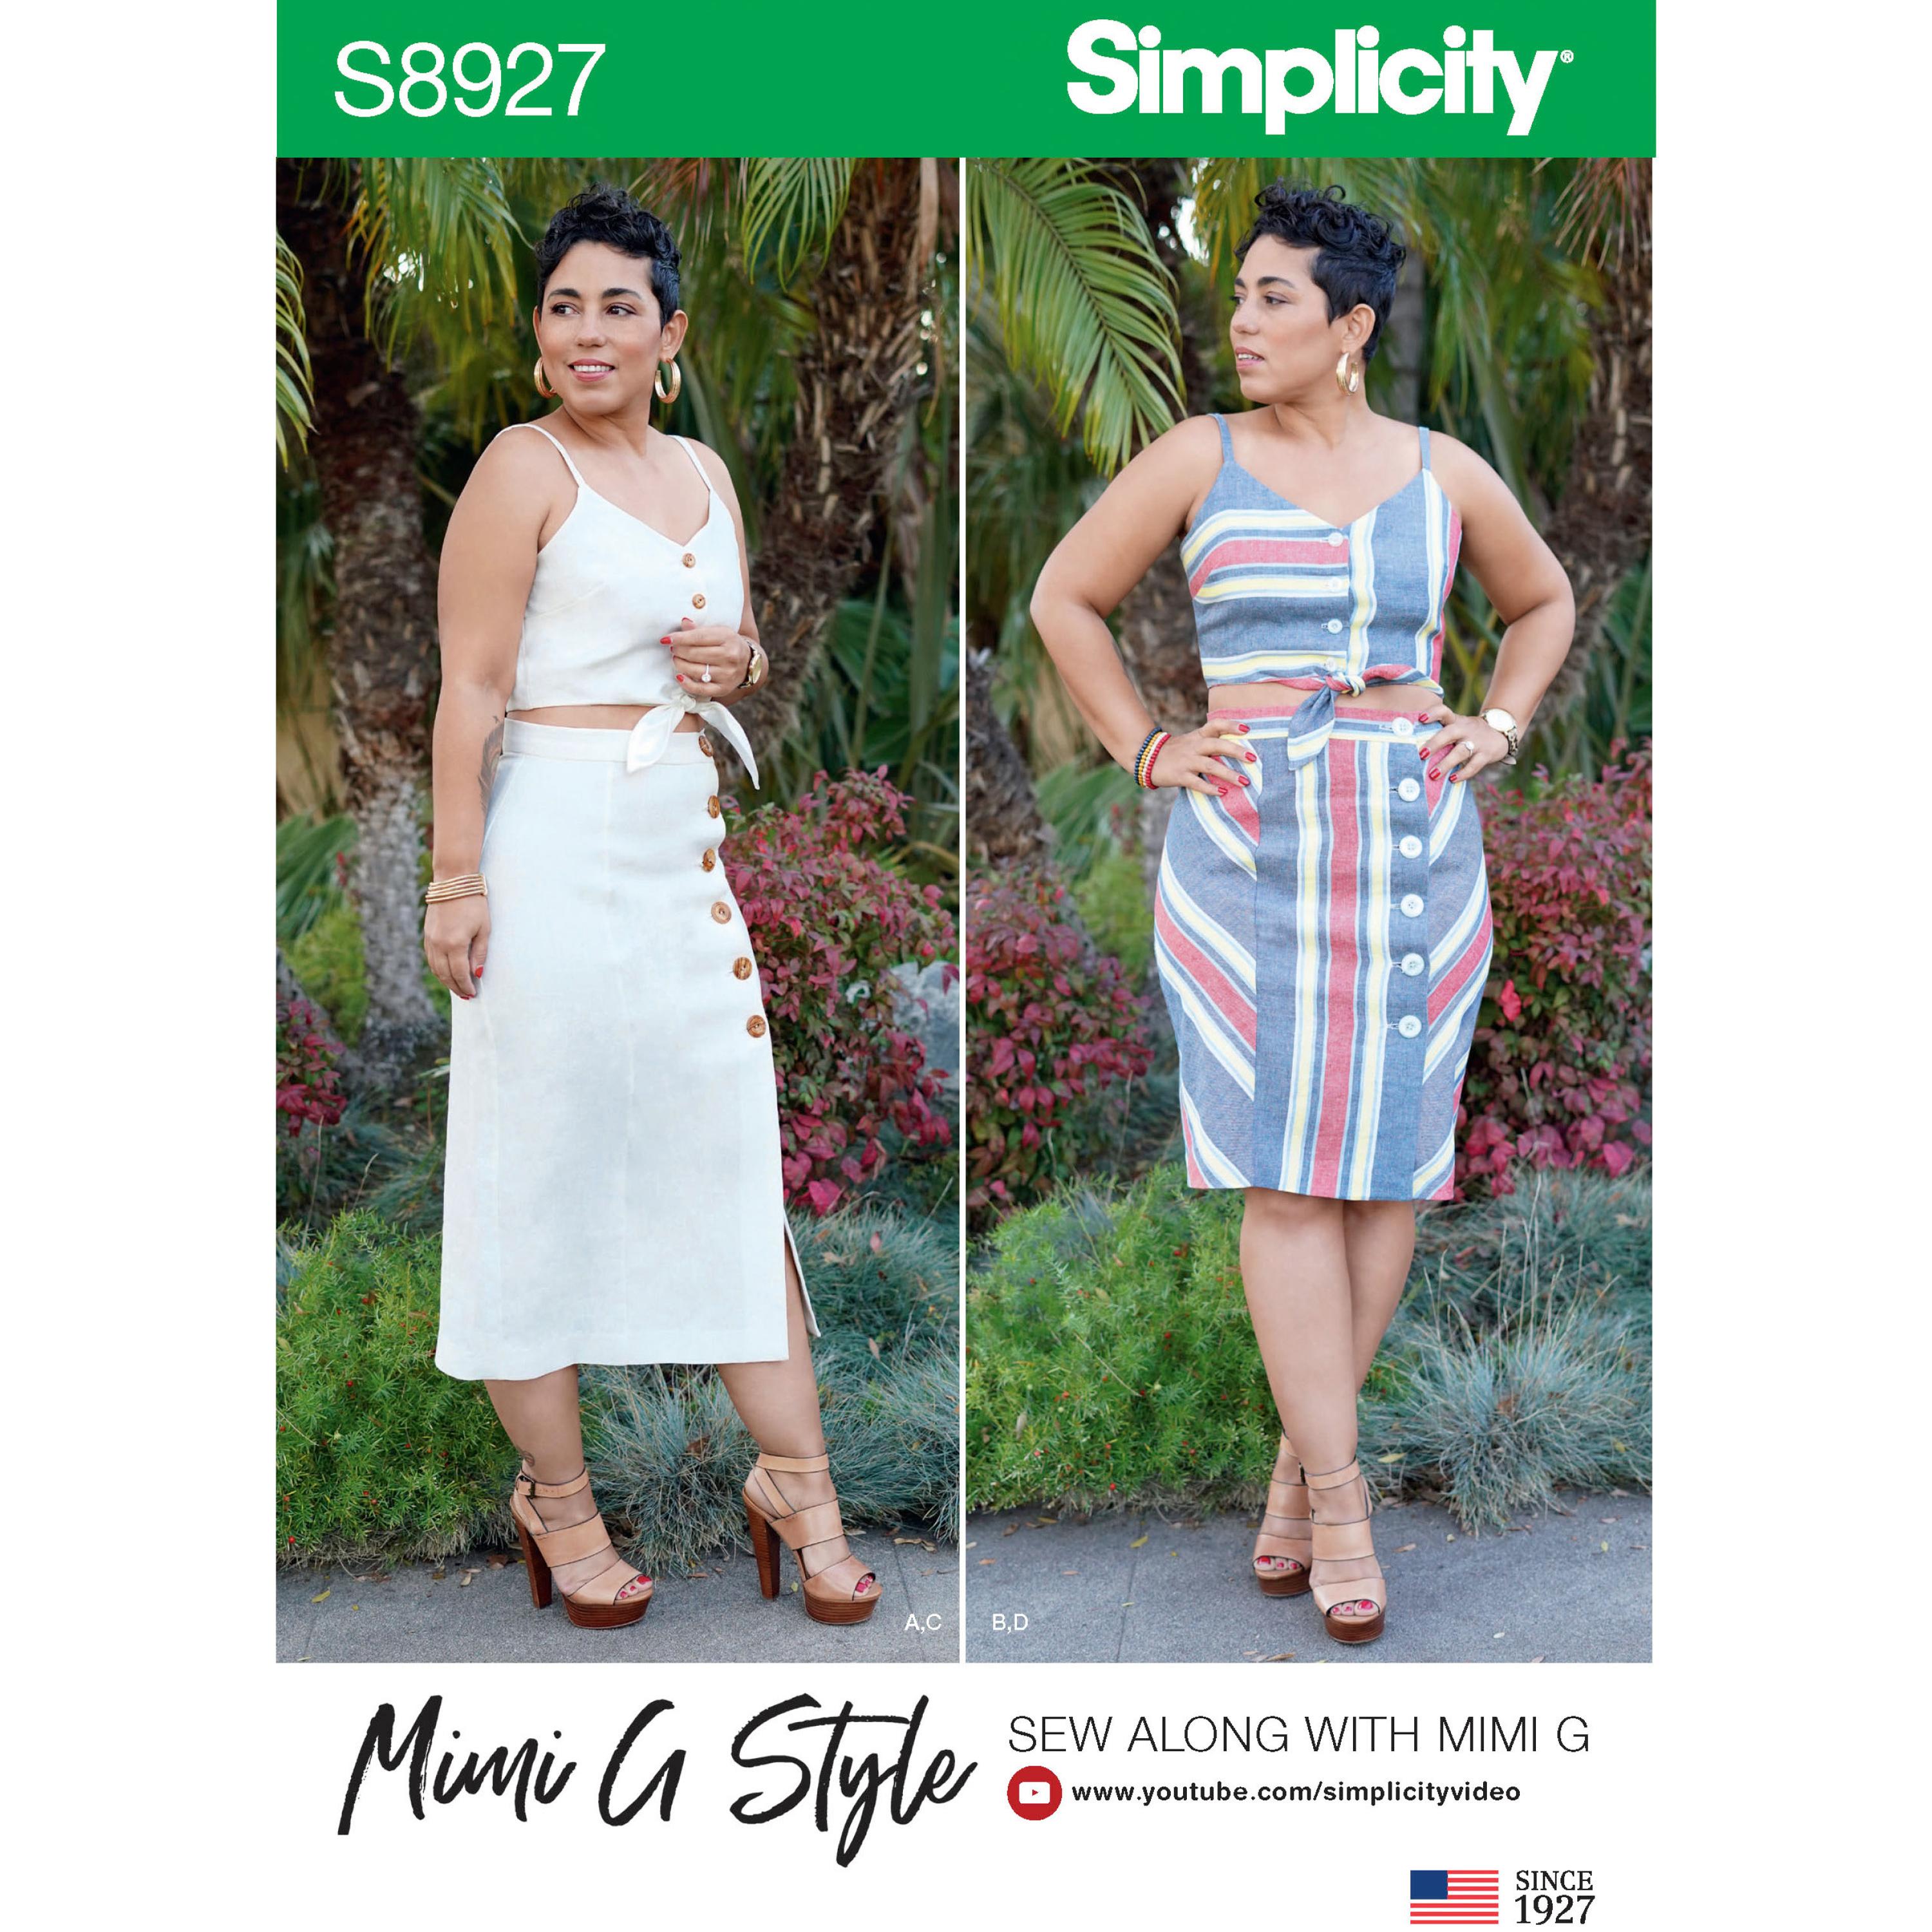 Simplicity S8927 Misses' Tie Front Tops and Skirts by Mimi G Style